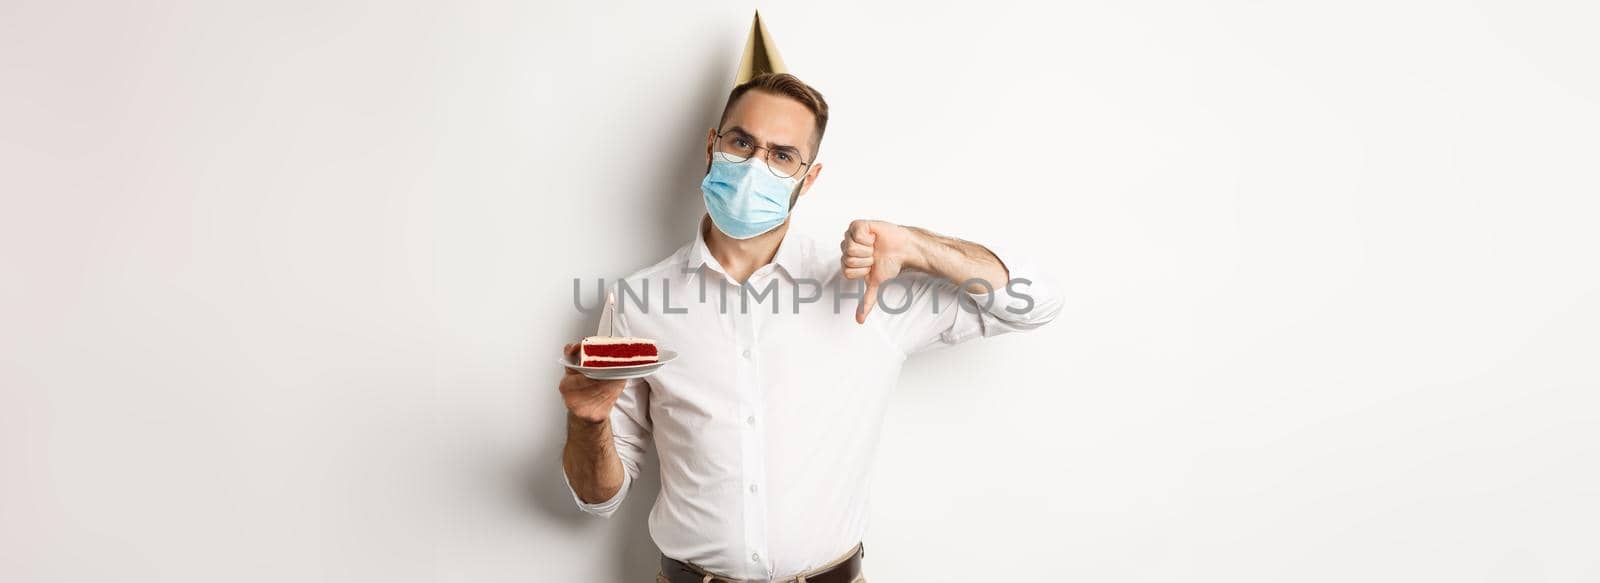 Covid-19, social distancing and celebration. Disappointed birthday guy wearing face mask, holding bday cake with wish candle, making thumb down to express dislike, white background.